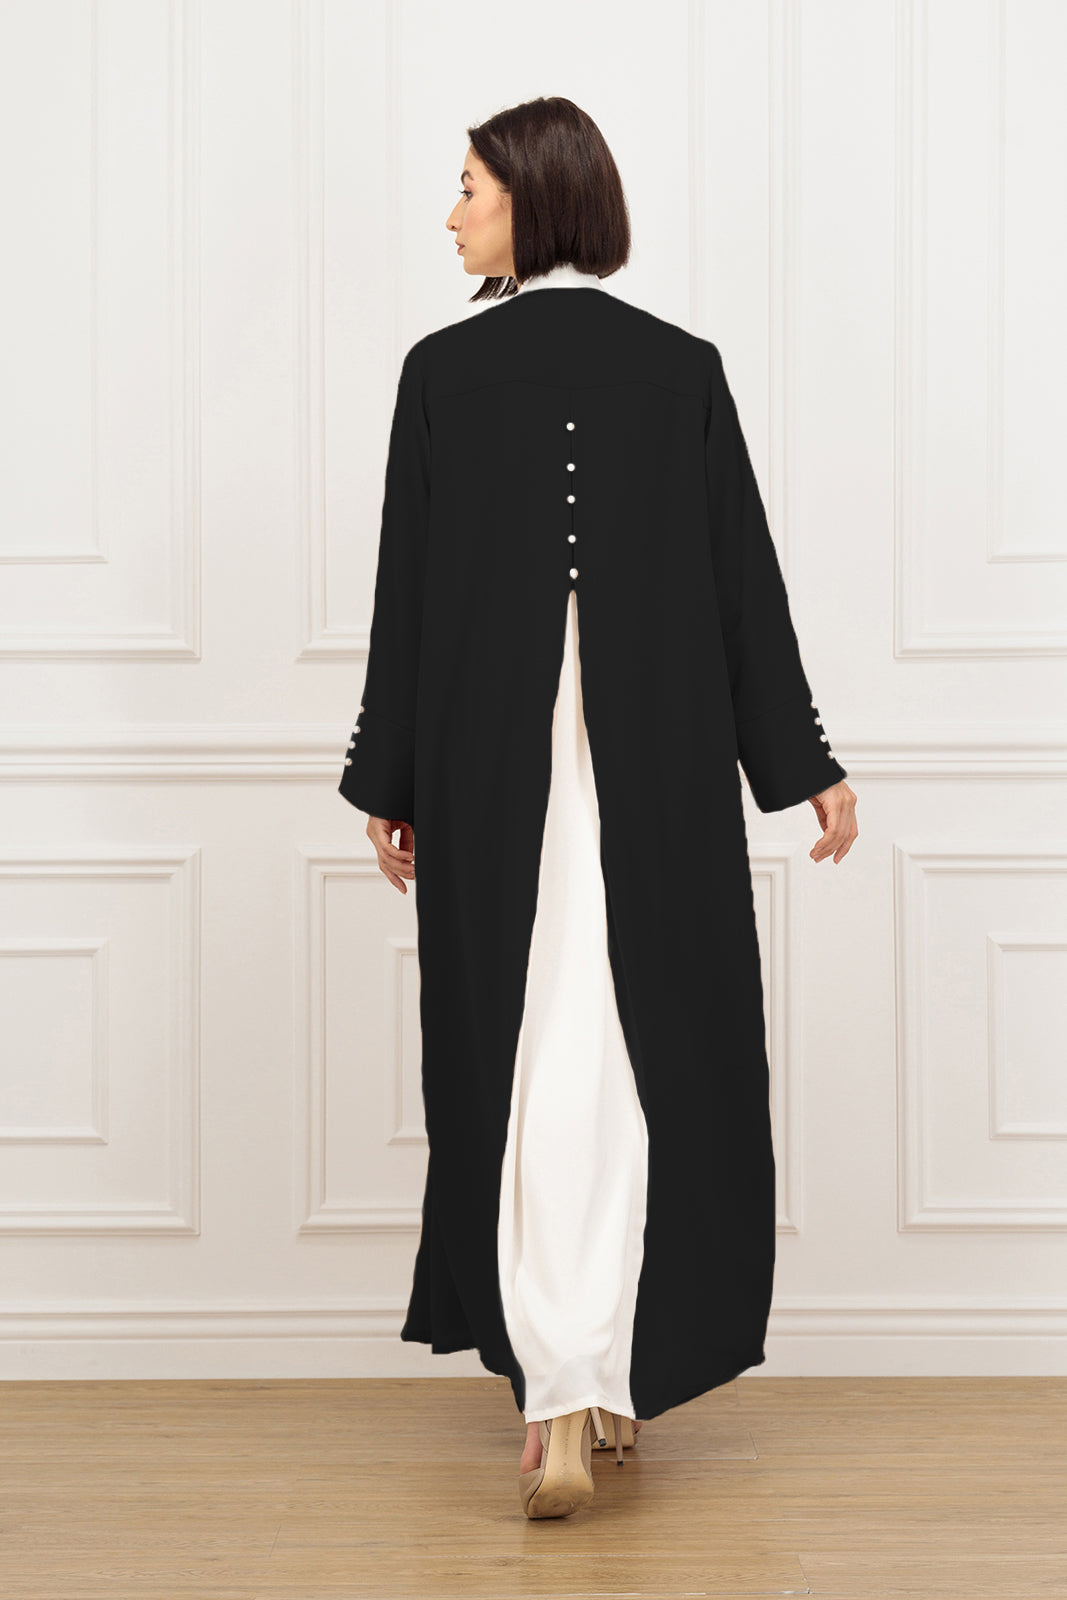 Straight cut Abaya with contrast color block